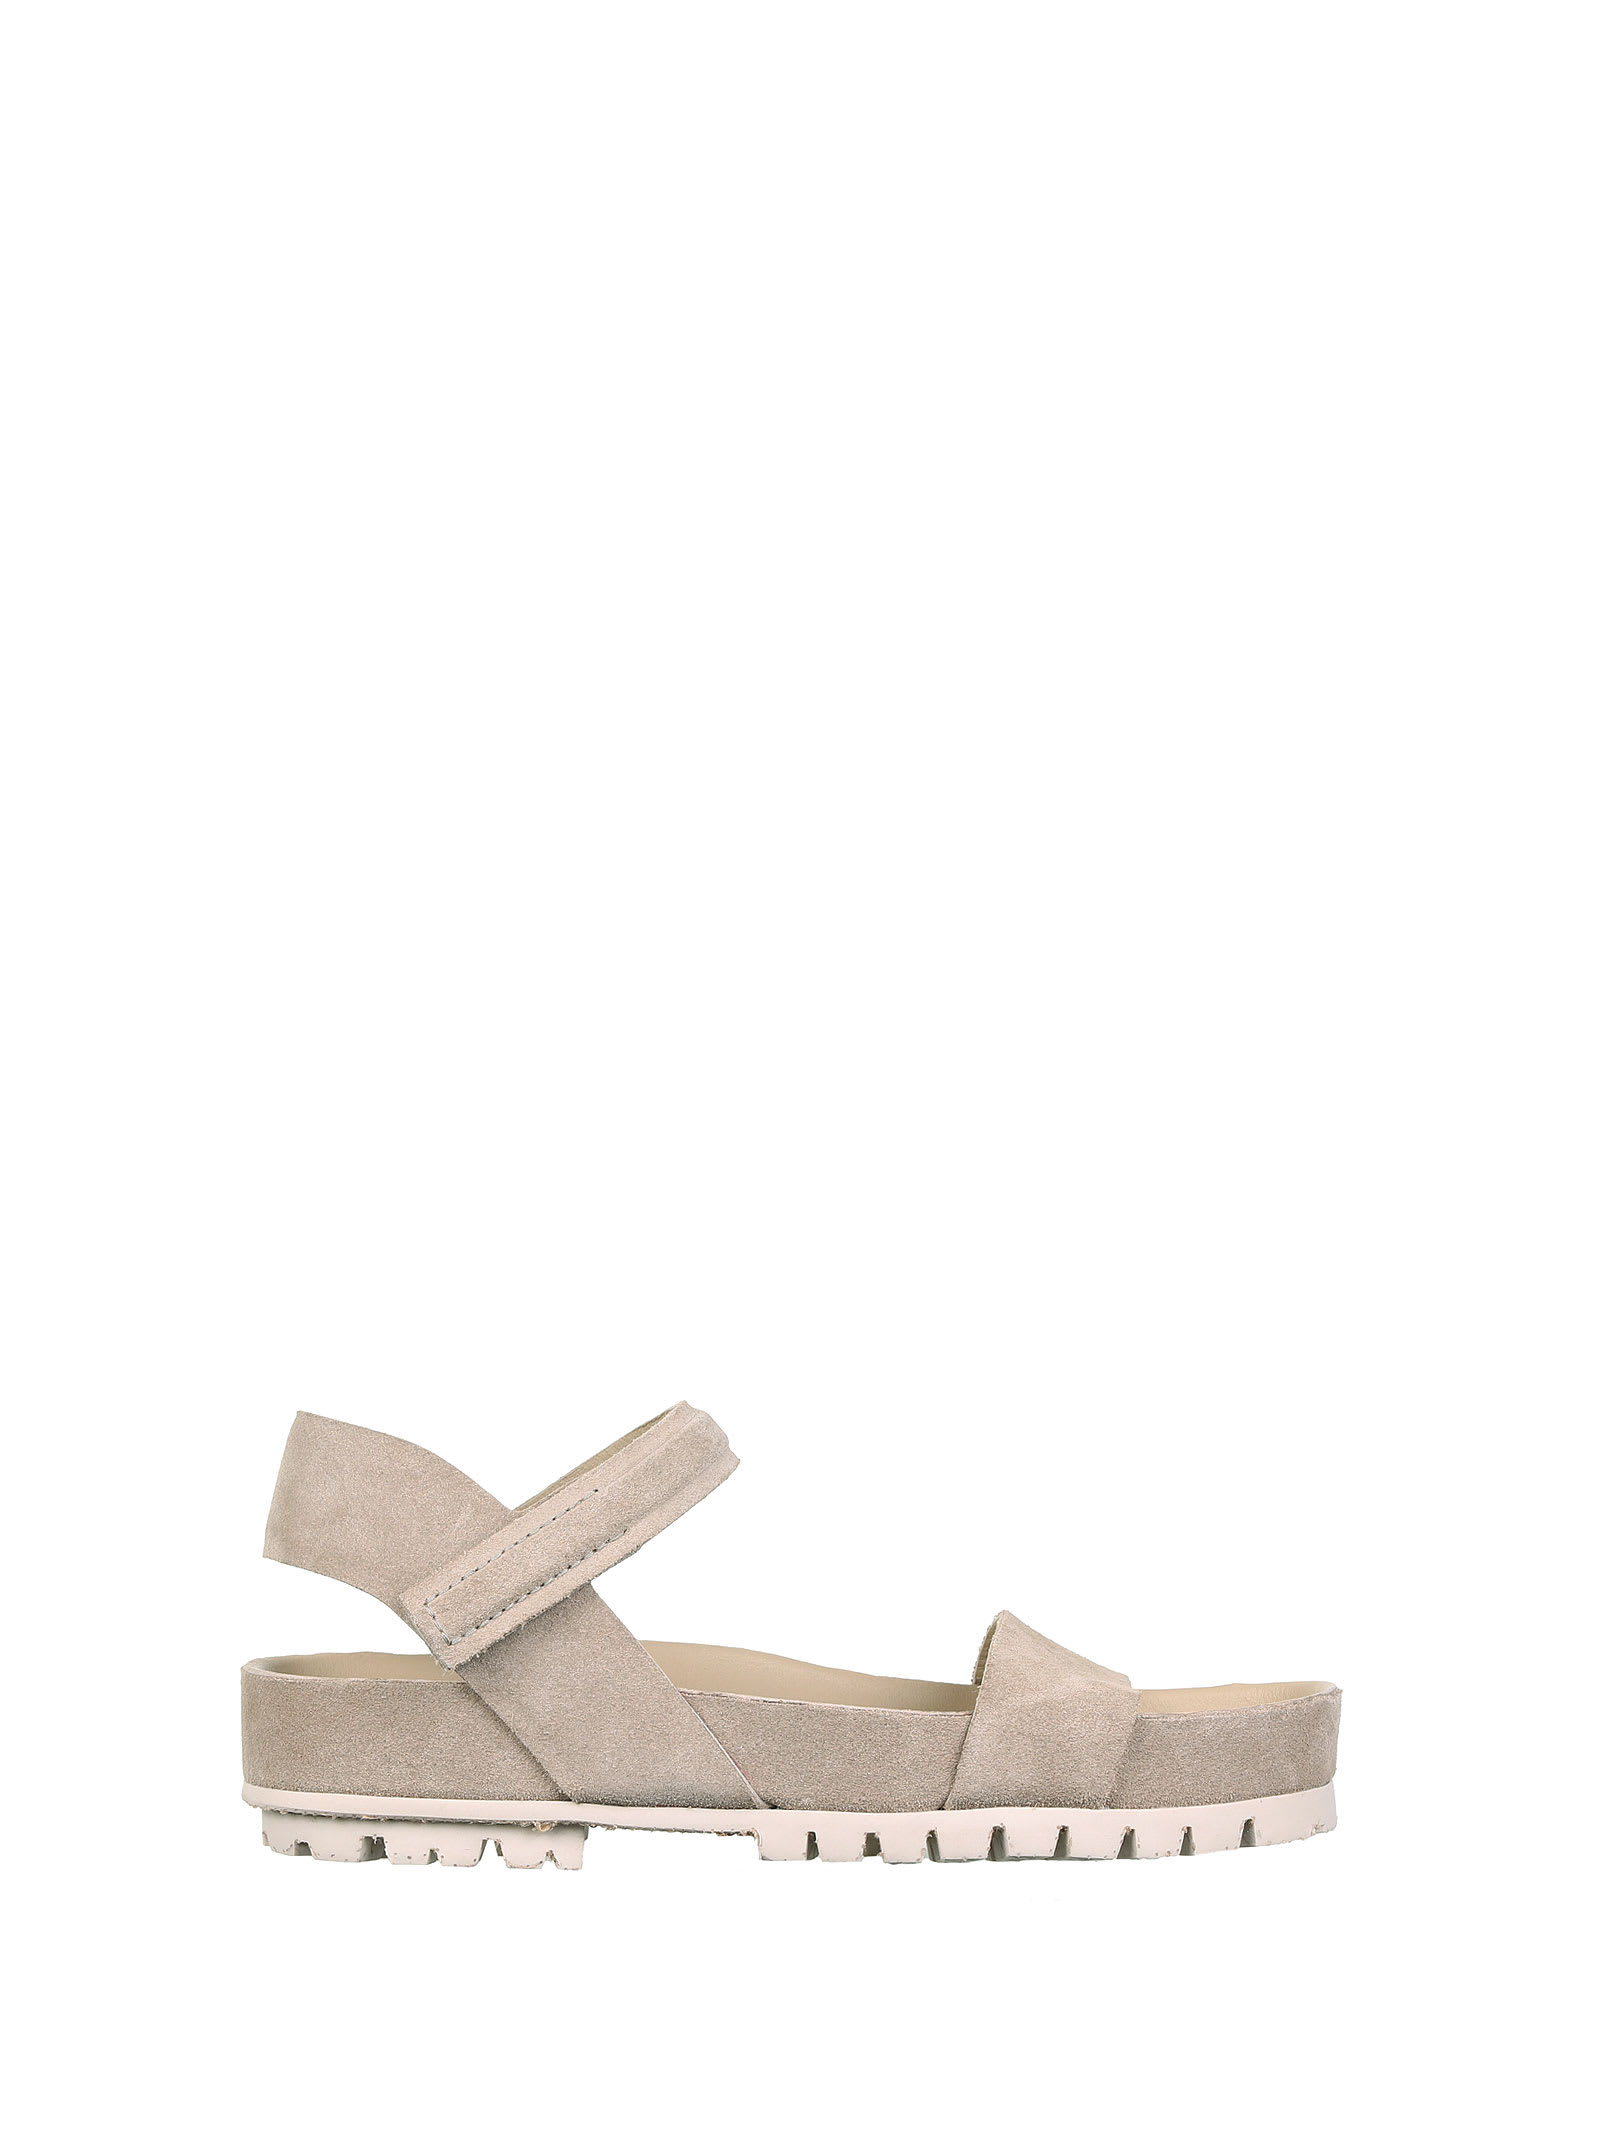 Pedro Garcia Sandal In Taupe Suede Leather